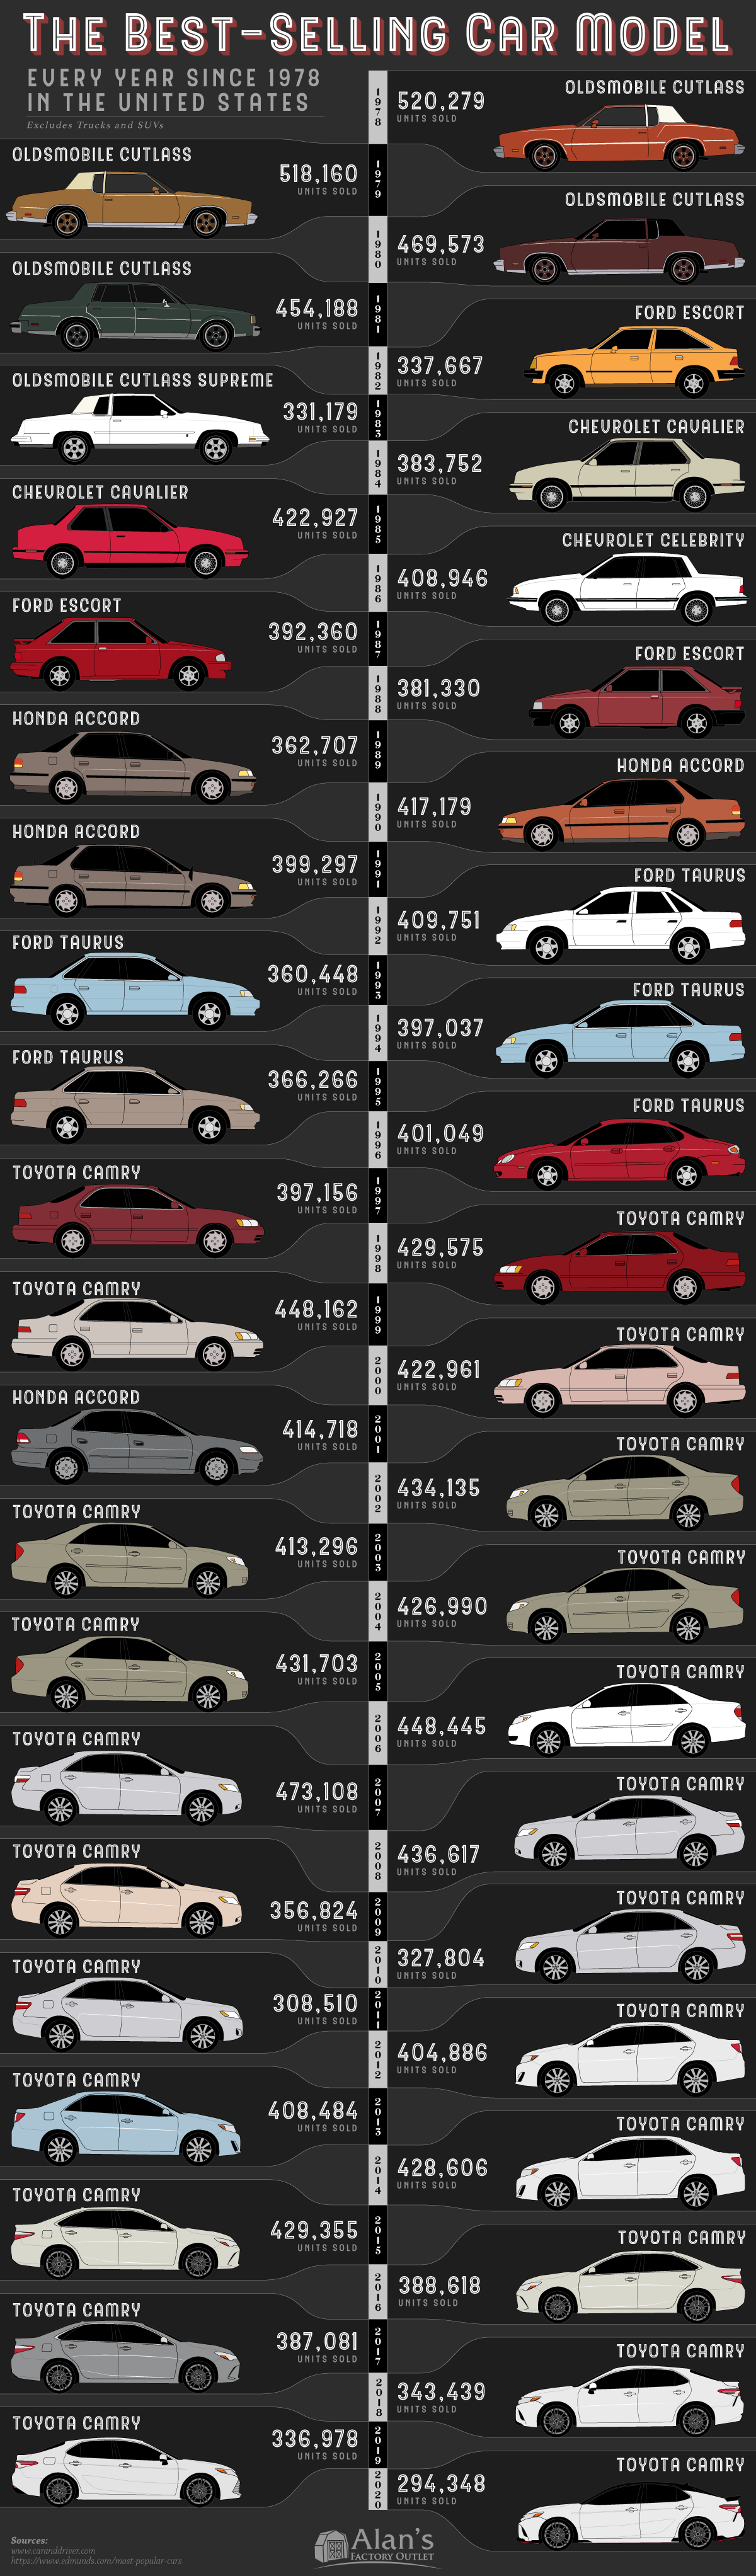 Best-Selling-Car-in-America-Since-1978.png?itok=bfuVg41r